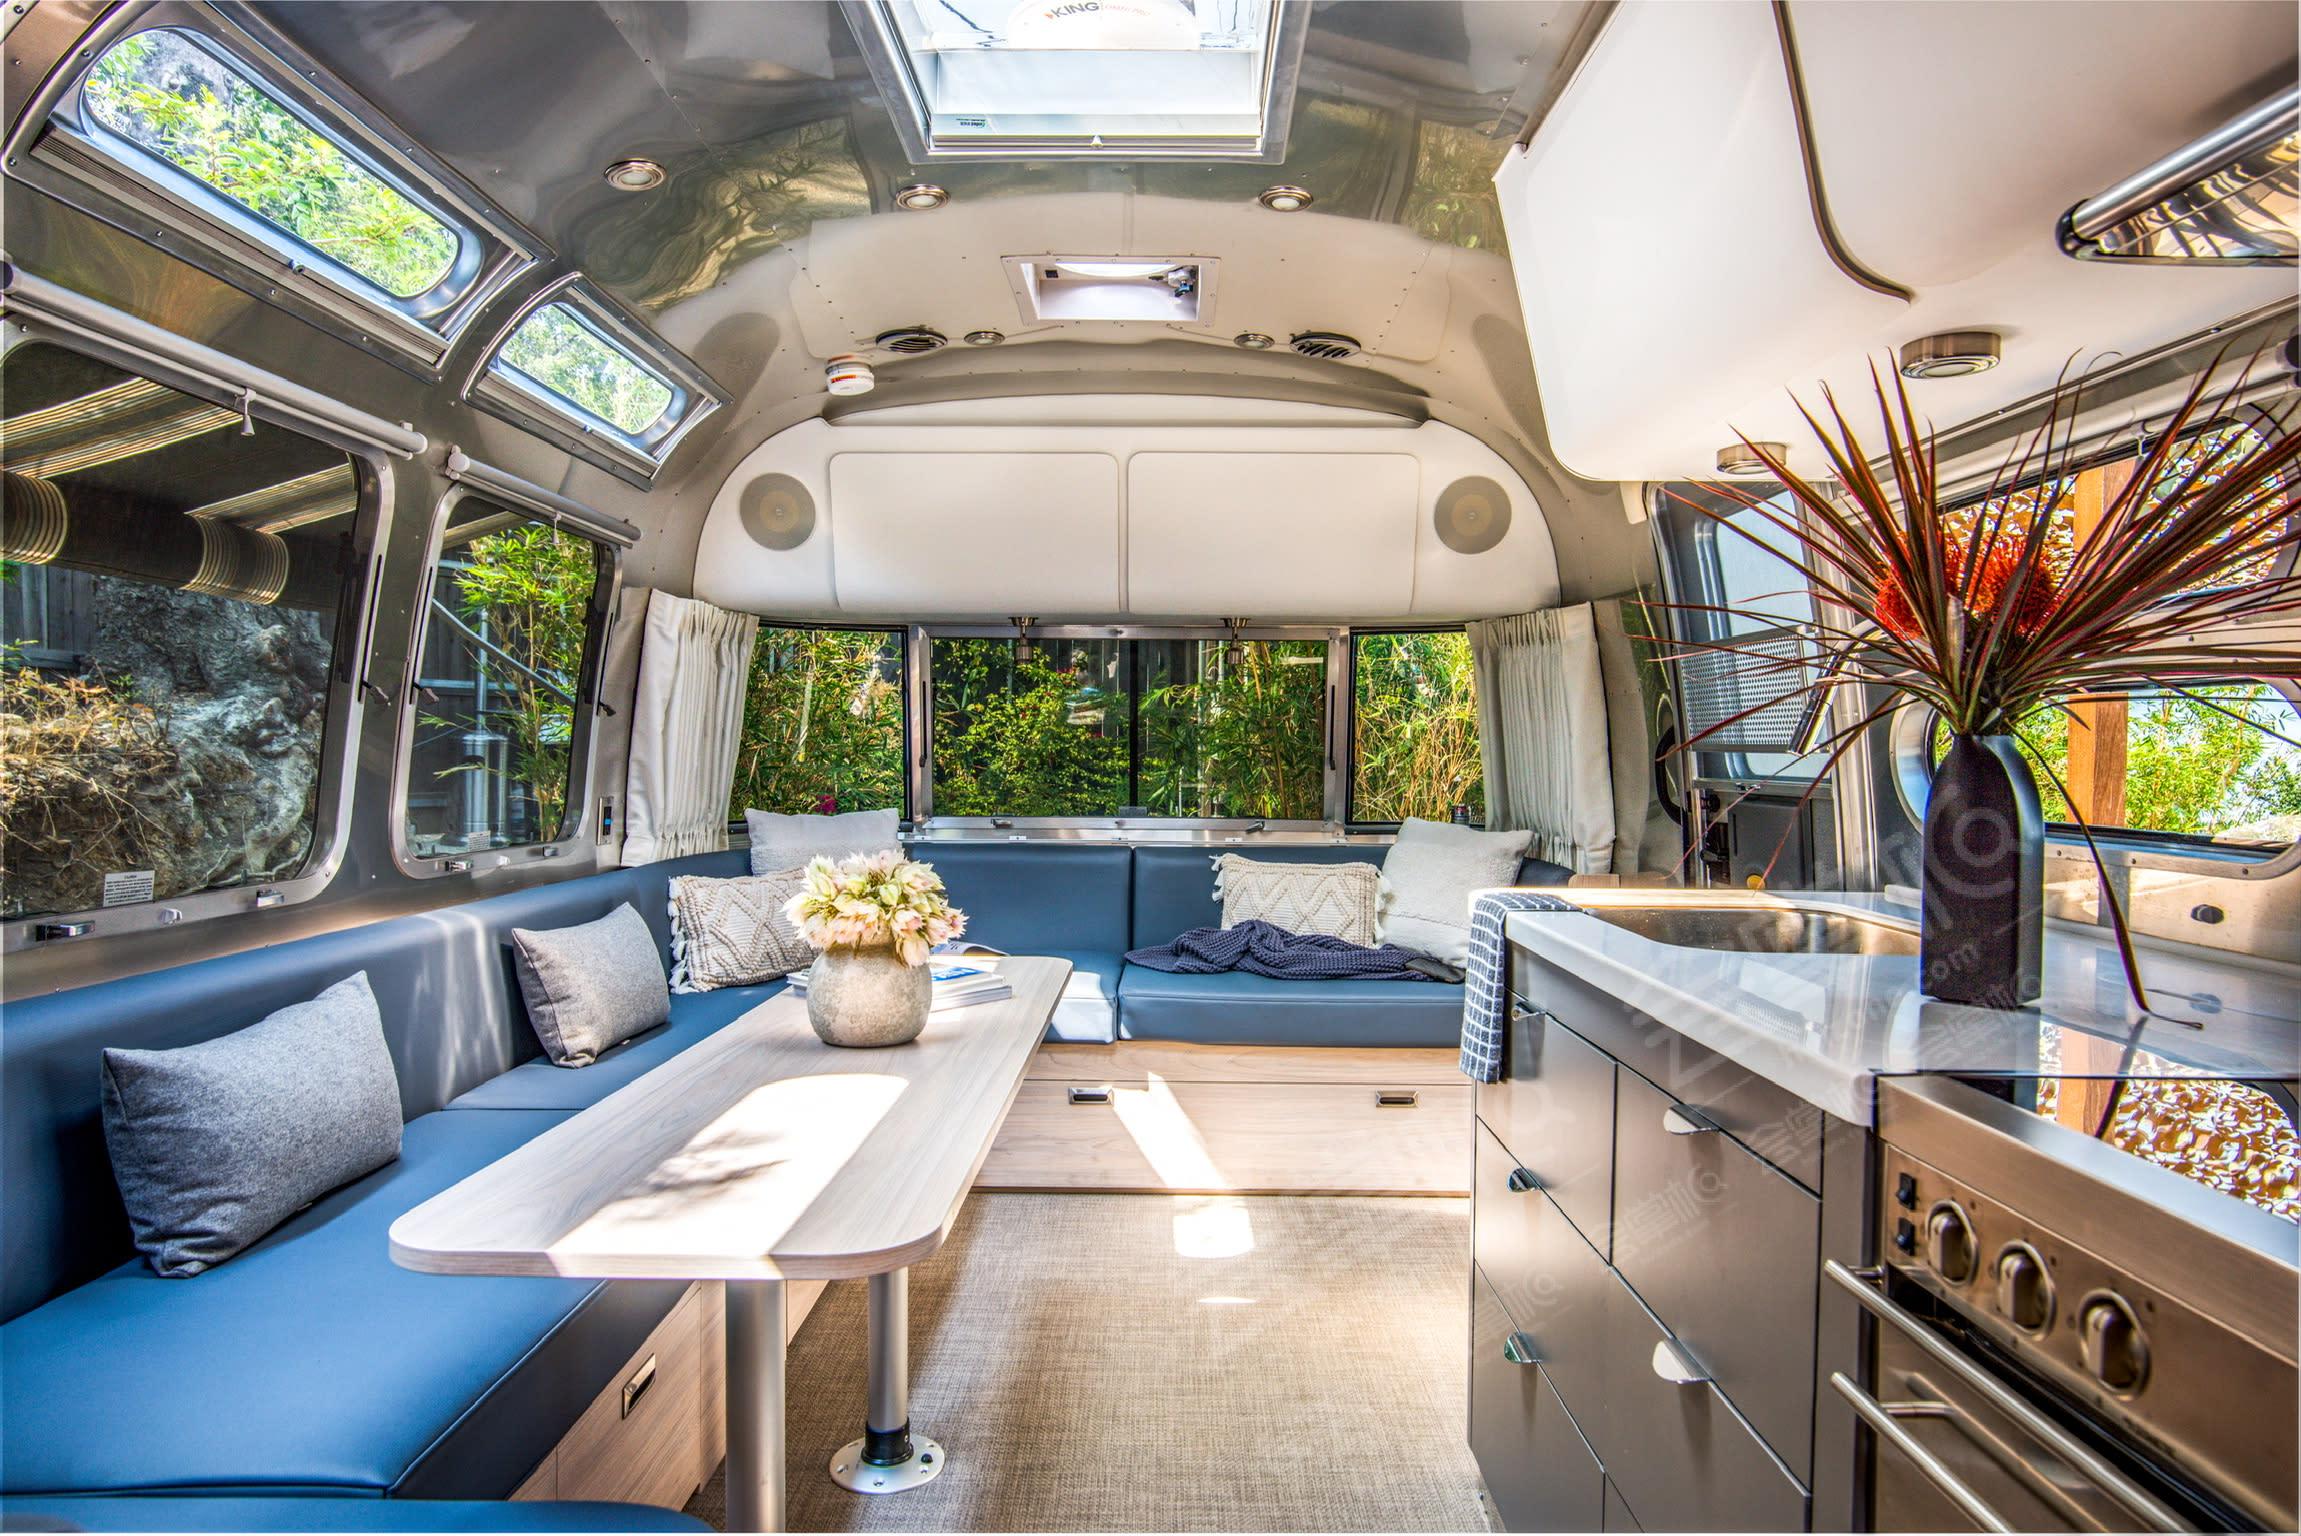 Airstream and pool overlooking the breathtaking views of Hollywood